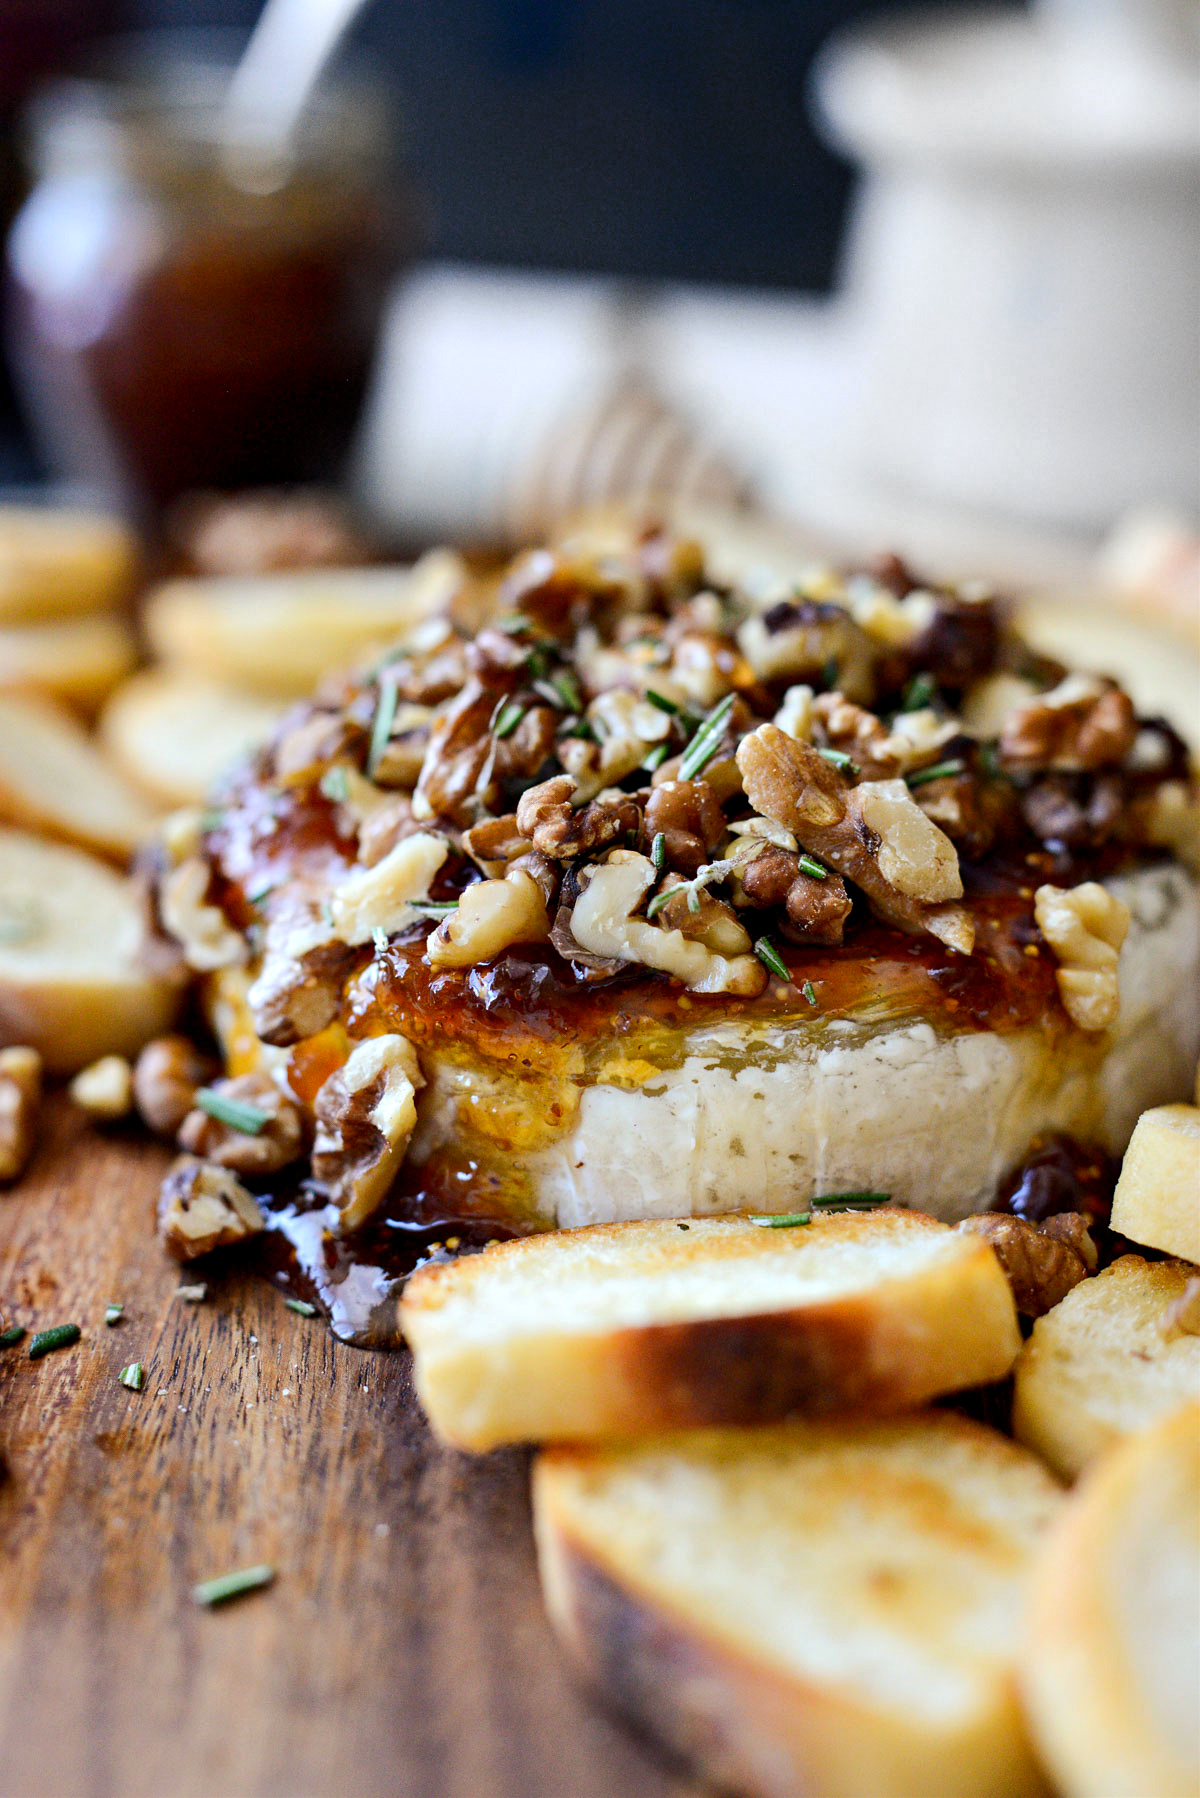 https://www.simplyscratch.com/wp-content/uploads/2020/12/Honey-Baked-Brie-with-Fig-Jam-and-Walnuts-l-SimplyScratch.com-brie-appetizer-holiday-snack-easyrecipe-13.jpg